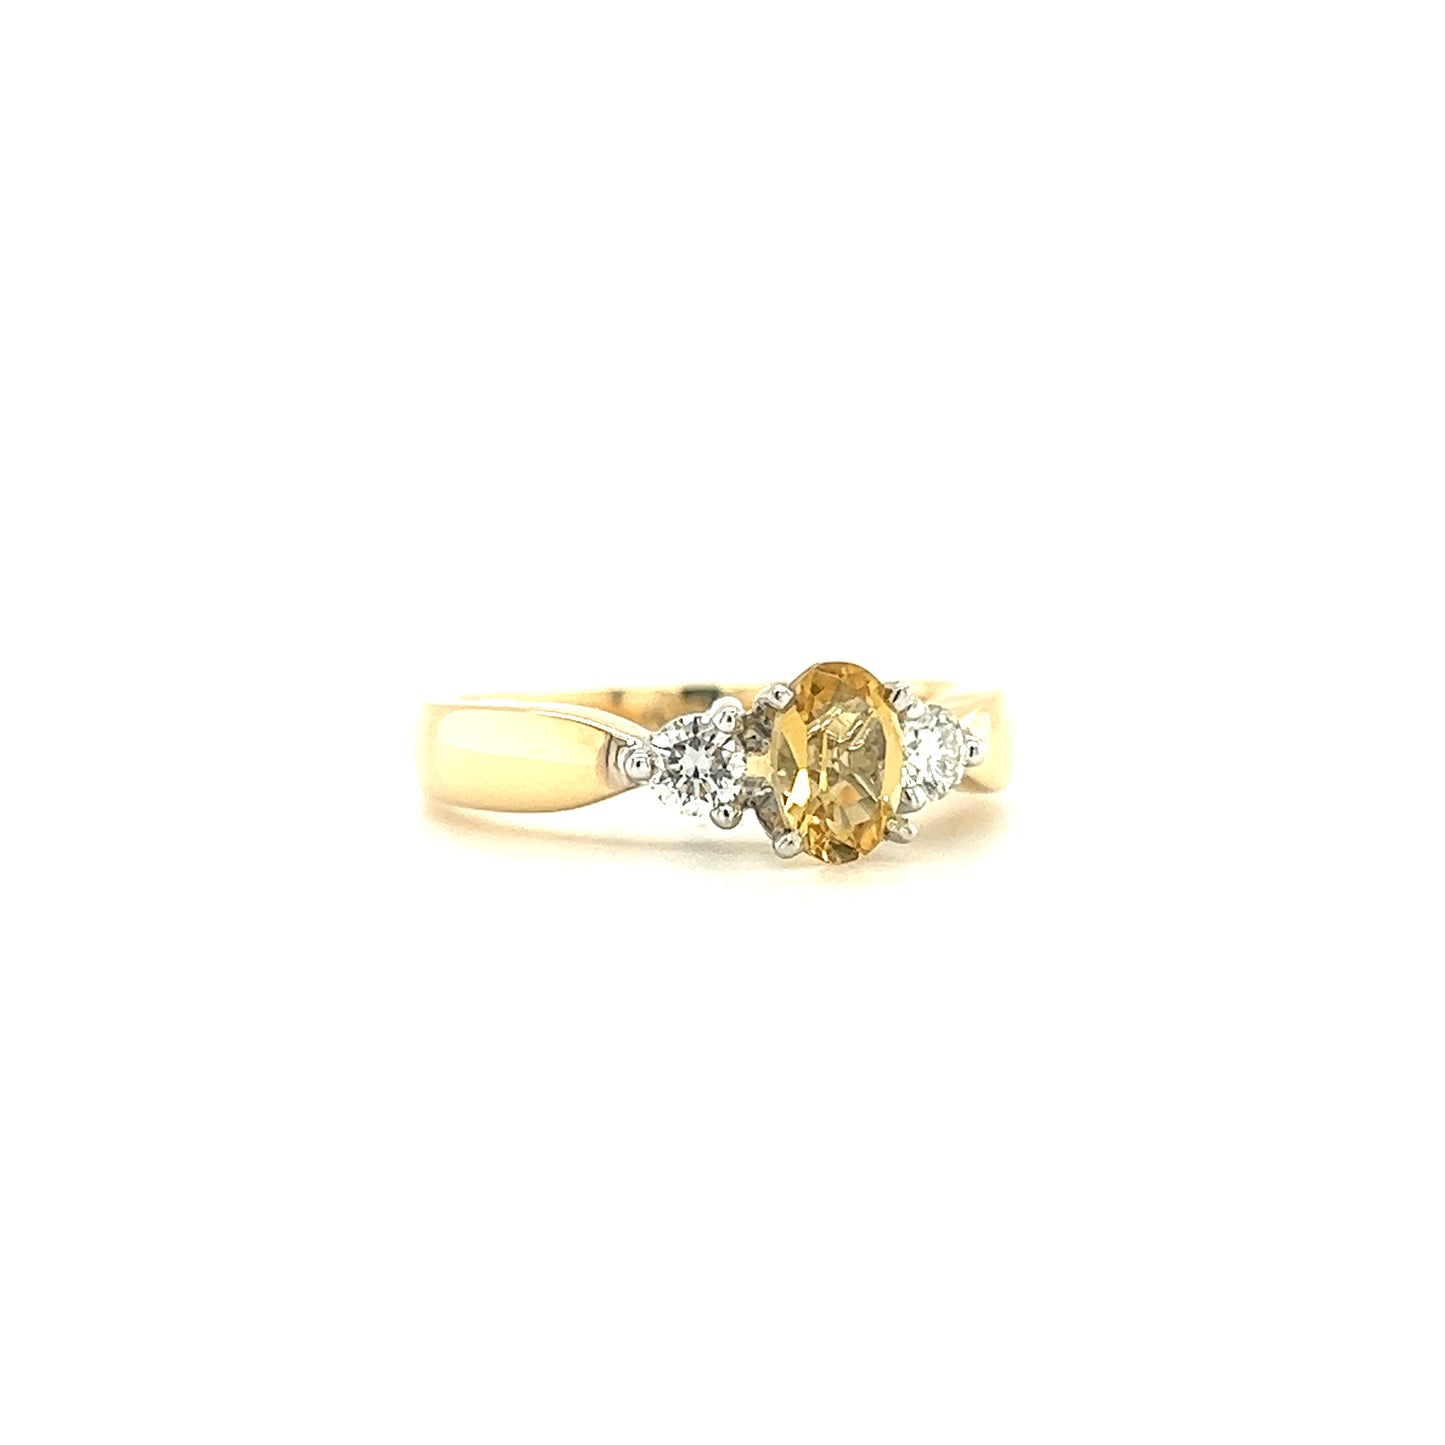 Precious Yellow Topaz Ring with Two Side Diamonds in 14K Yellow Gold Left Side View